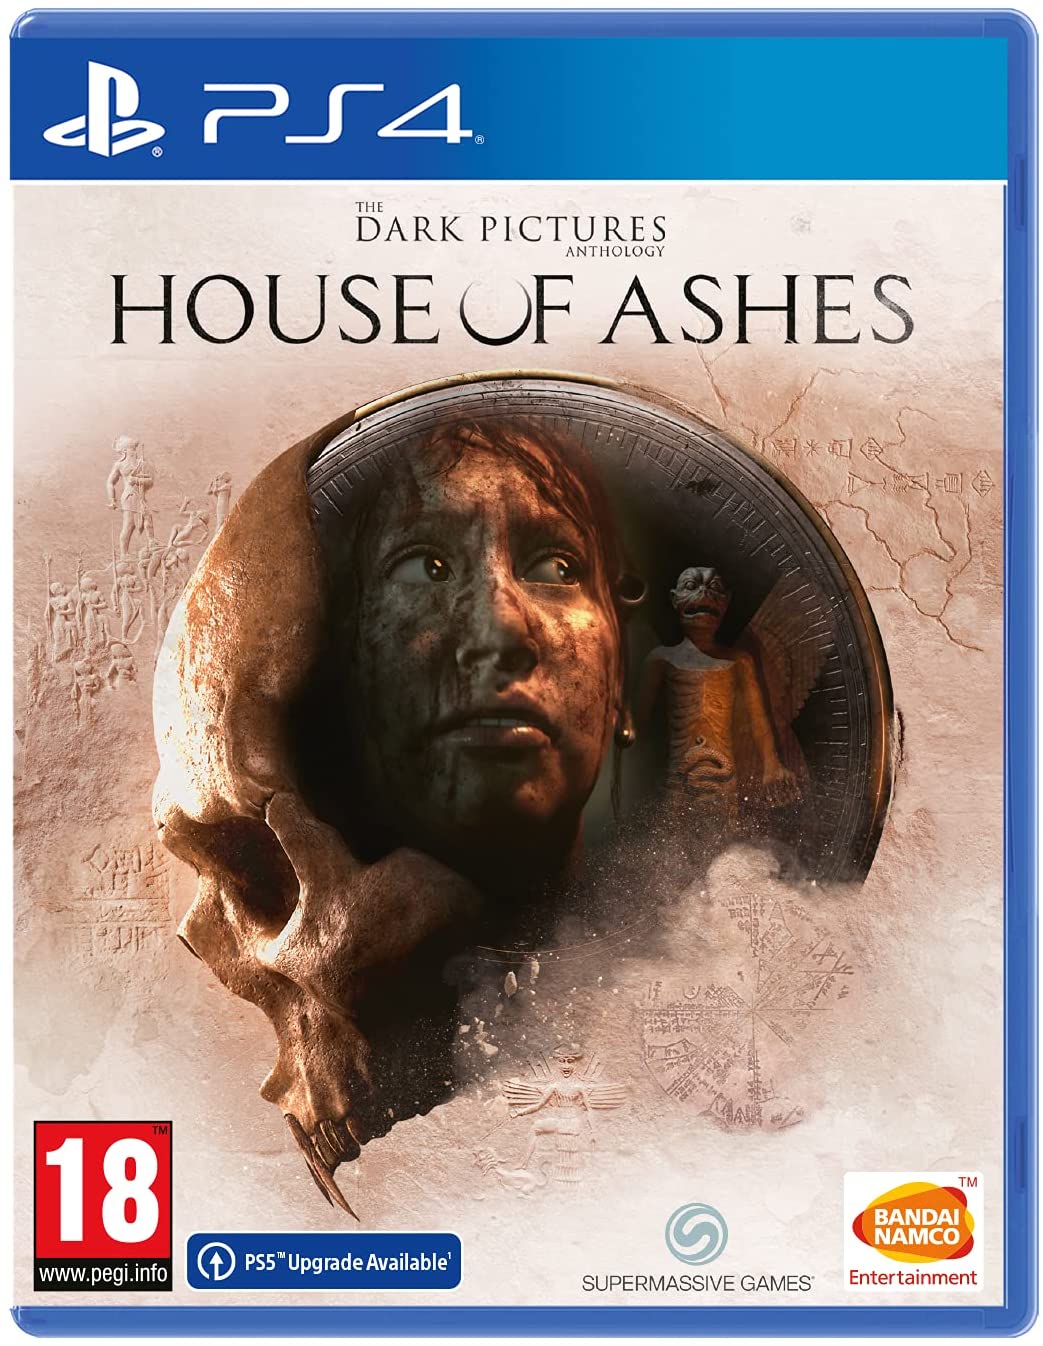 0876 - The Dark Pictures Anthology House of Ashes/